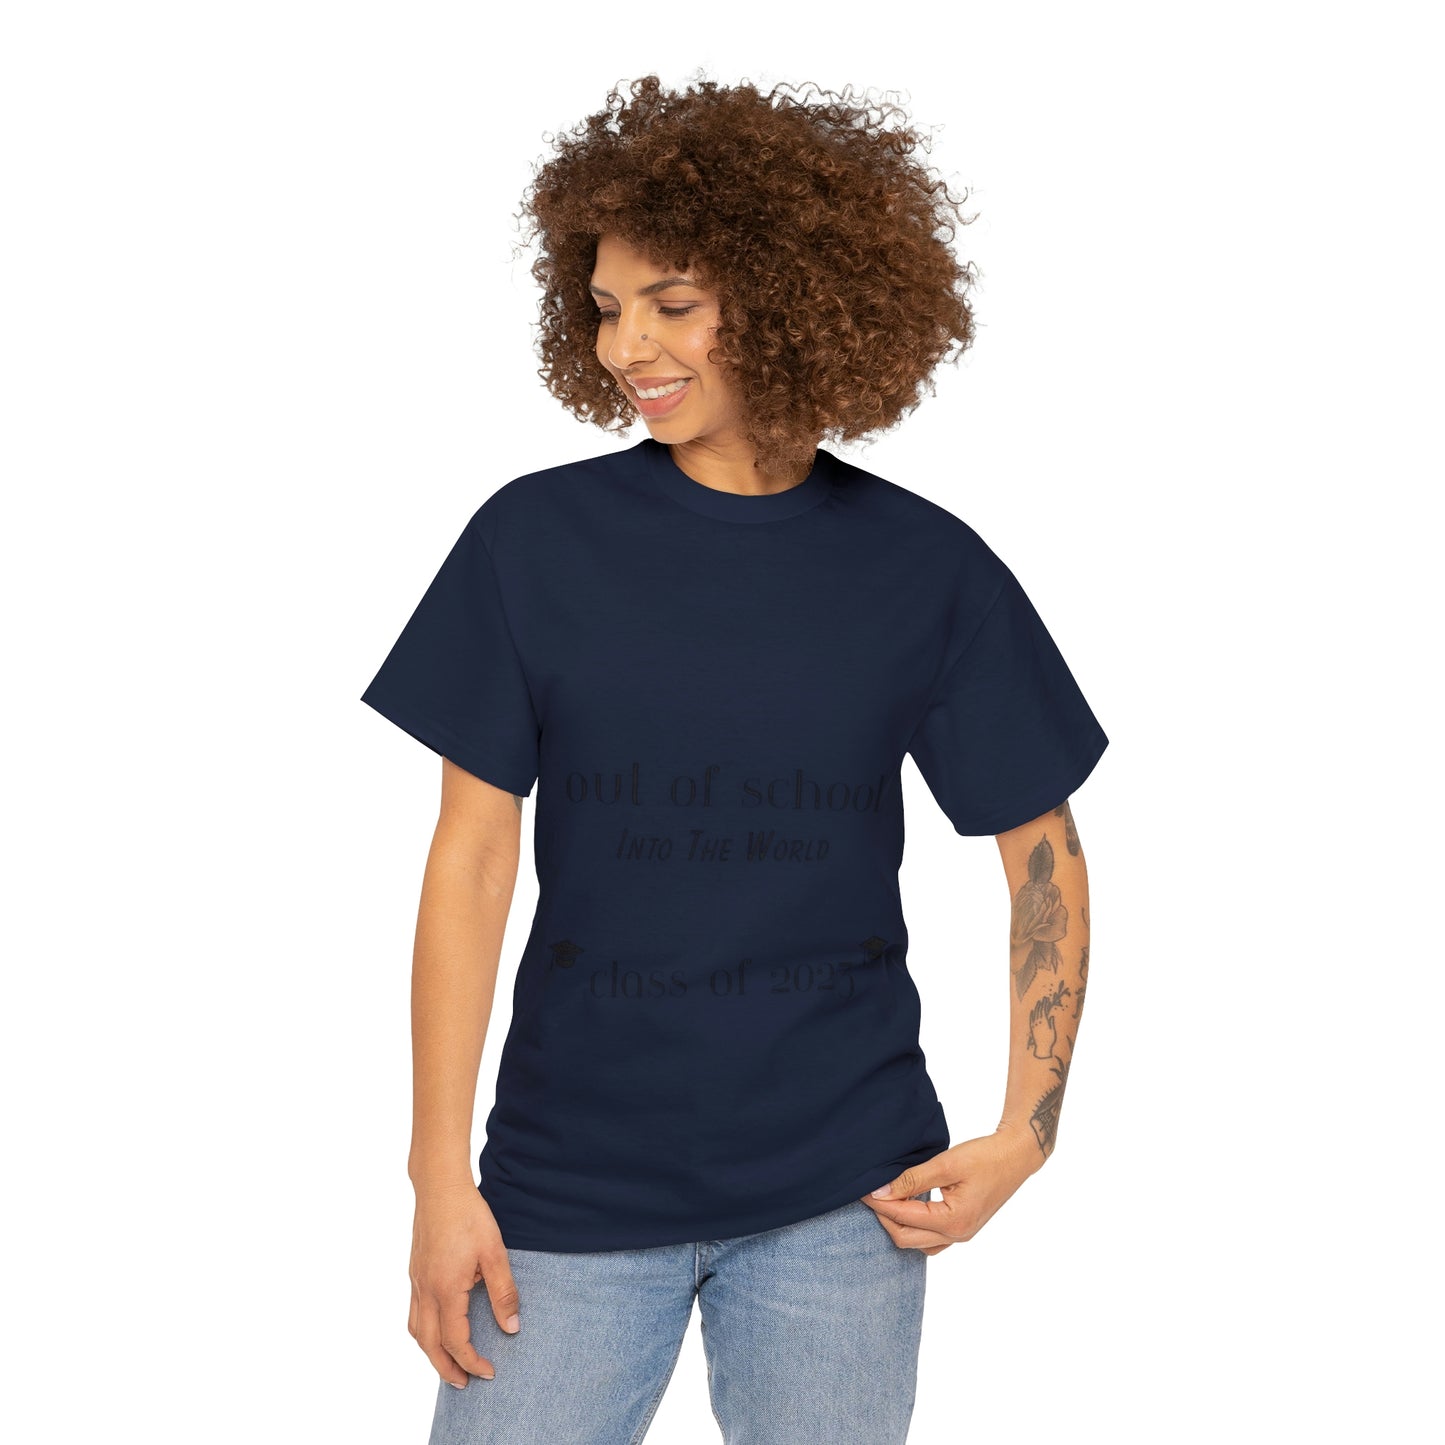 Out Of School Into The World T-shirt 2023 Graduation T-shirt